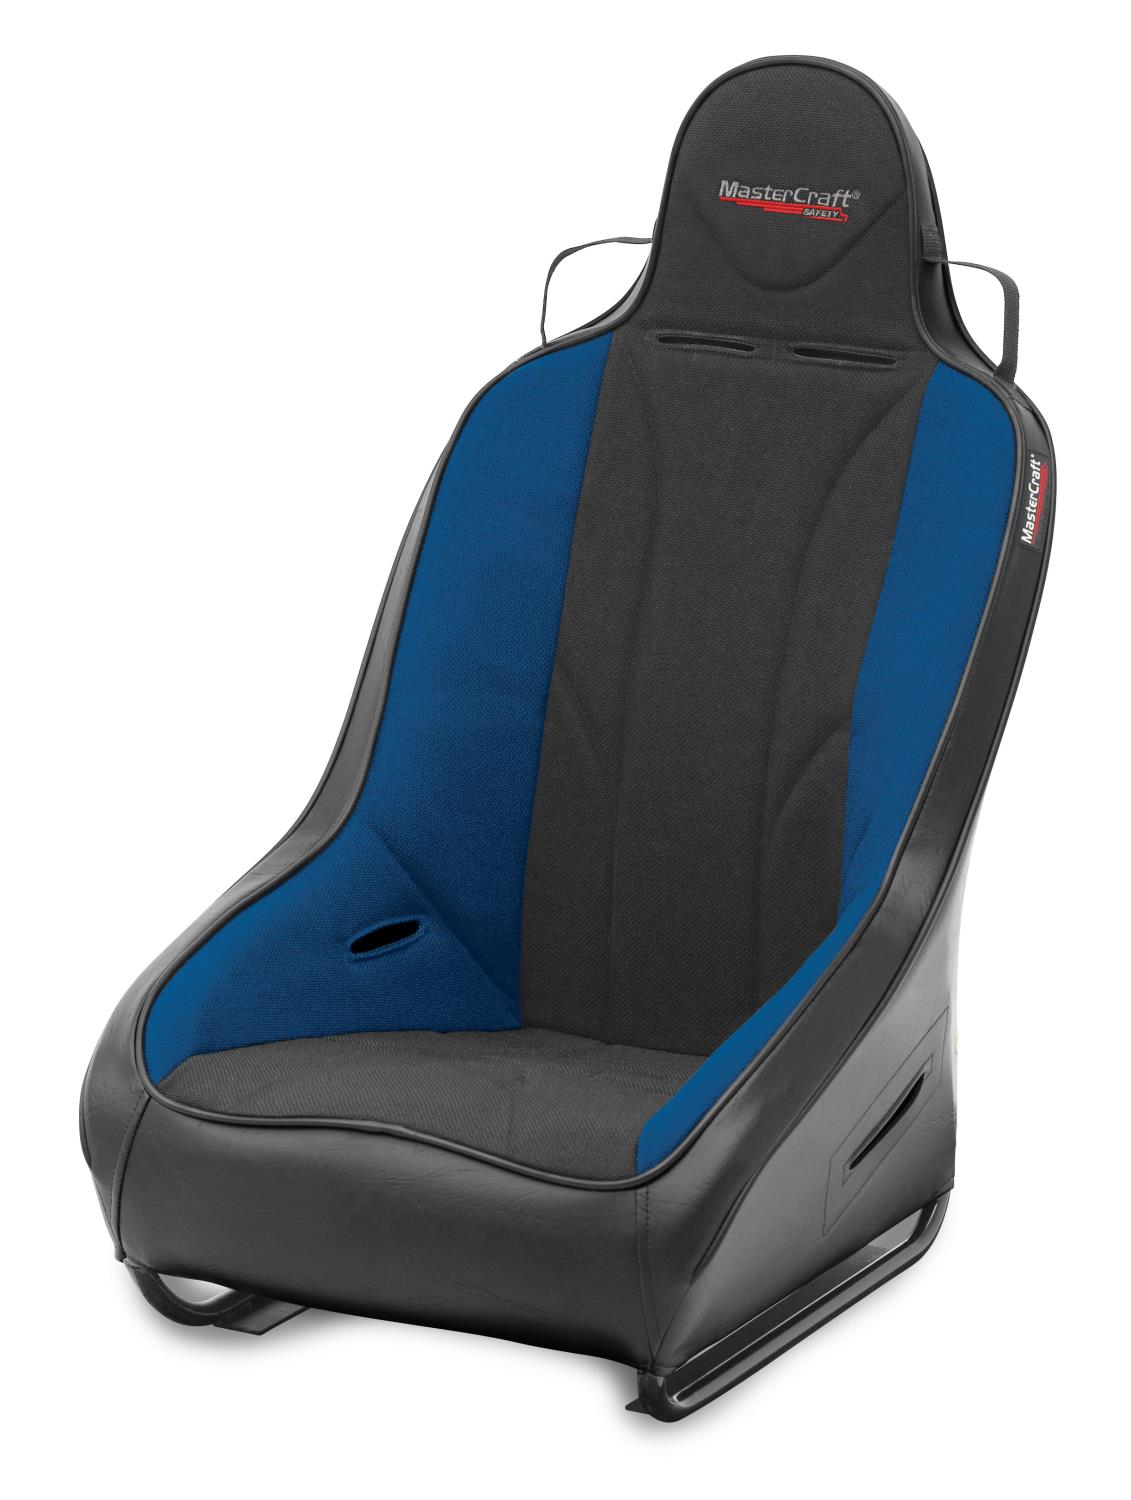 560113 1 in. WIDER PROSeat w/Fixed Headrest, Black w/ Black Fabric Center and Blue Side Panels, Black Band w/BRS Stitch